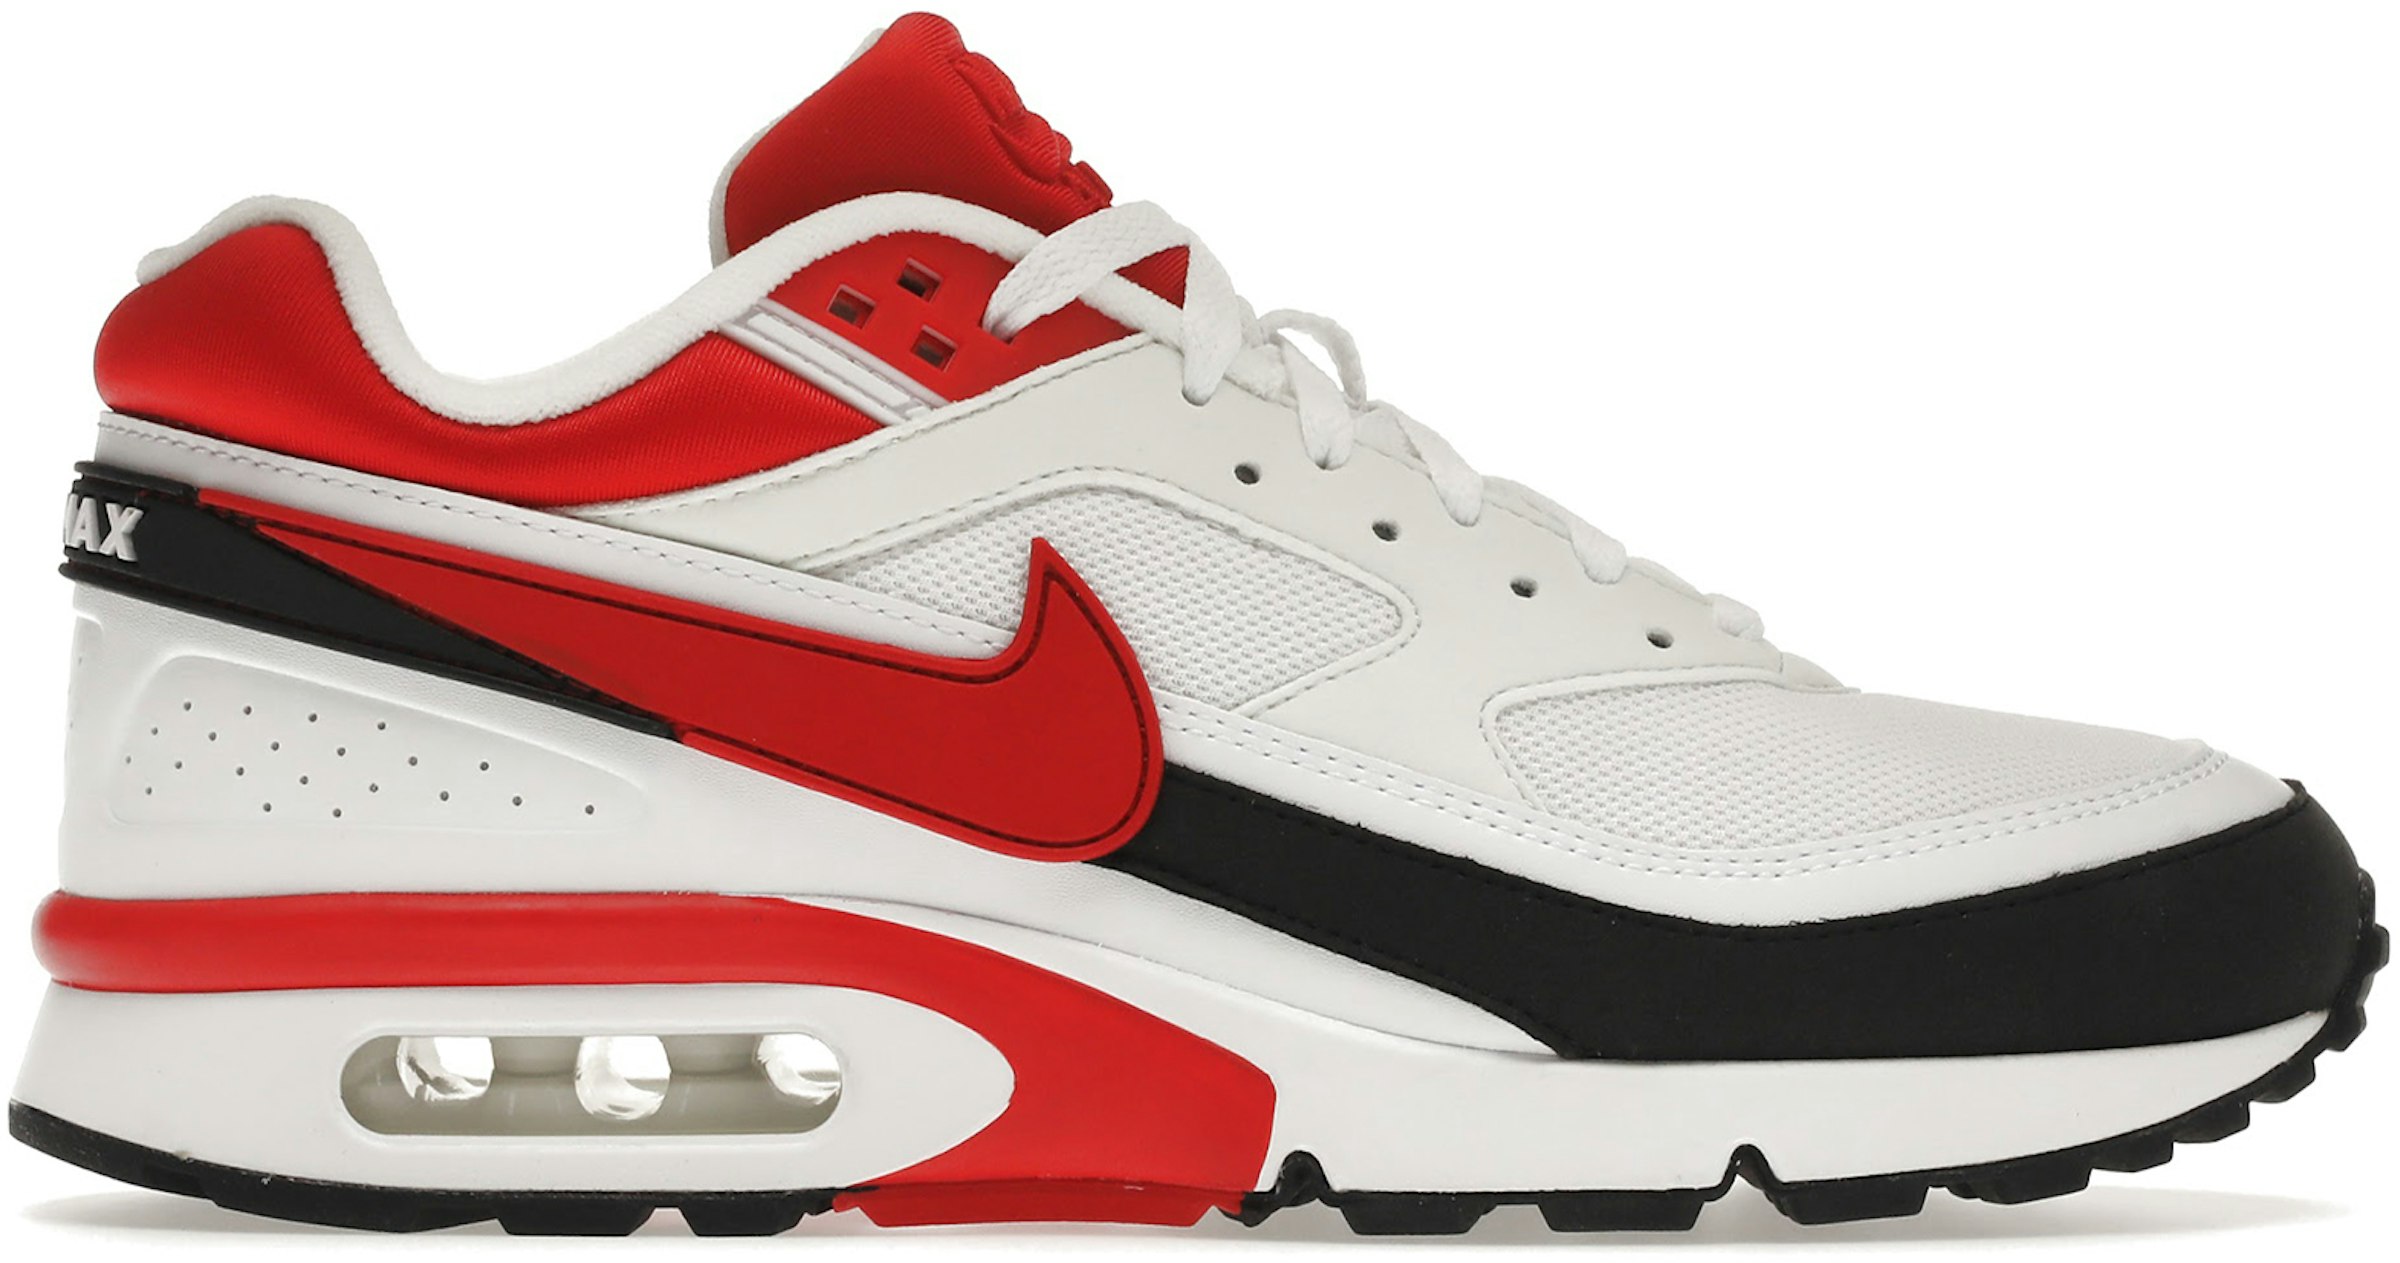 fuego Política Taxi Nike Air Max BW OG Sport Red Men's - DN4113-100 - US